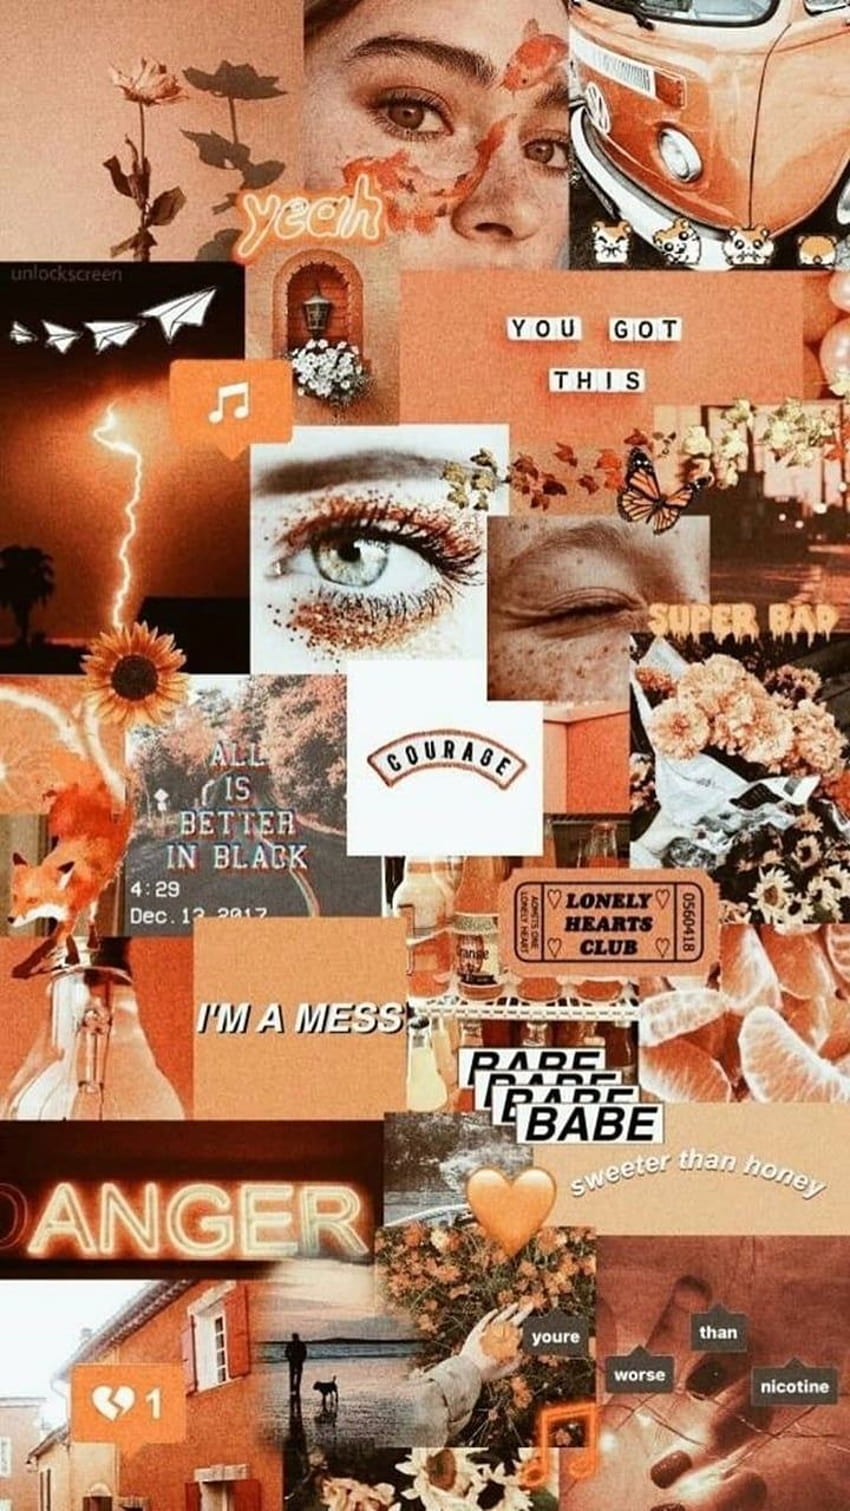 Aesthetic collage background with orange and brown colors - Cowgirl, collage